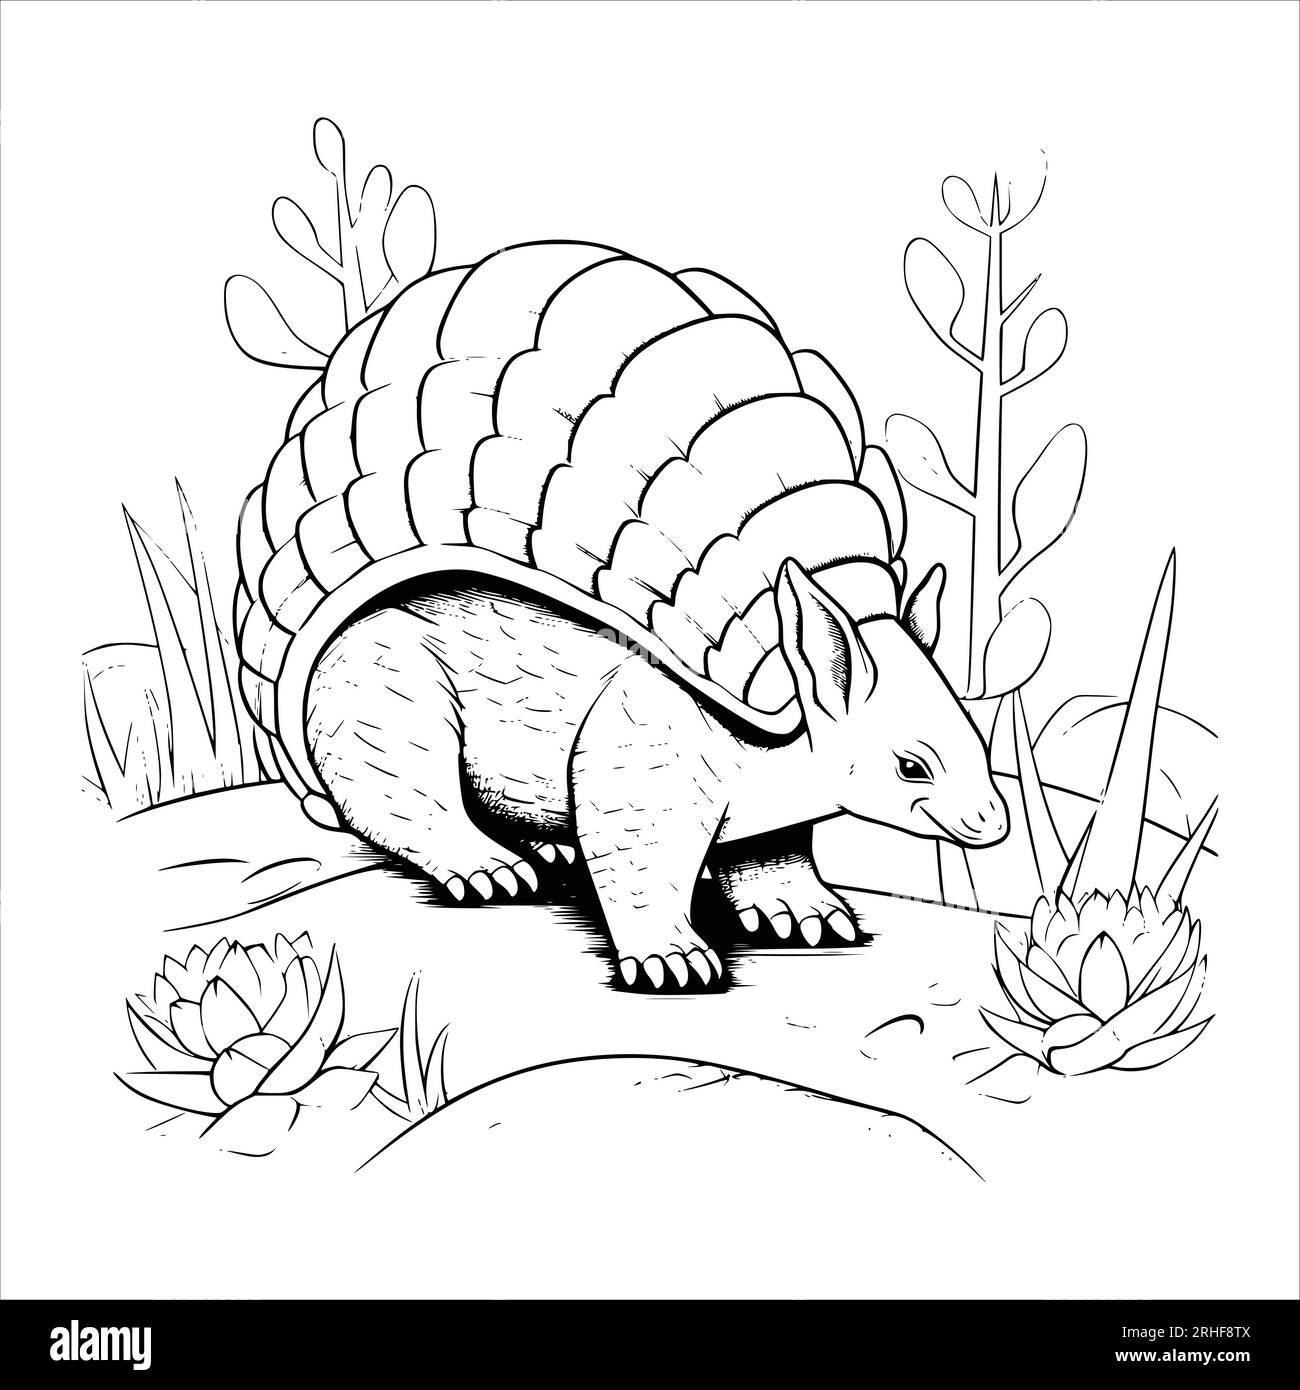 Armadillo Coloring Page For Kids Stock Vector